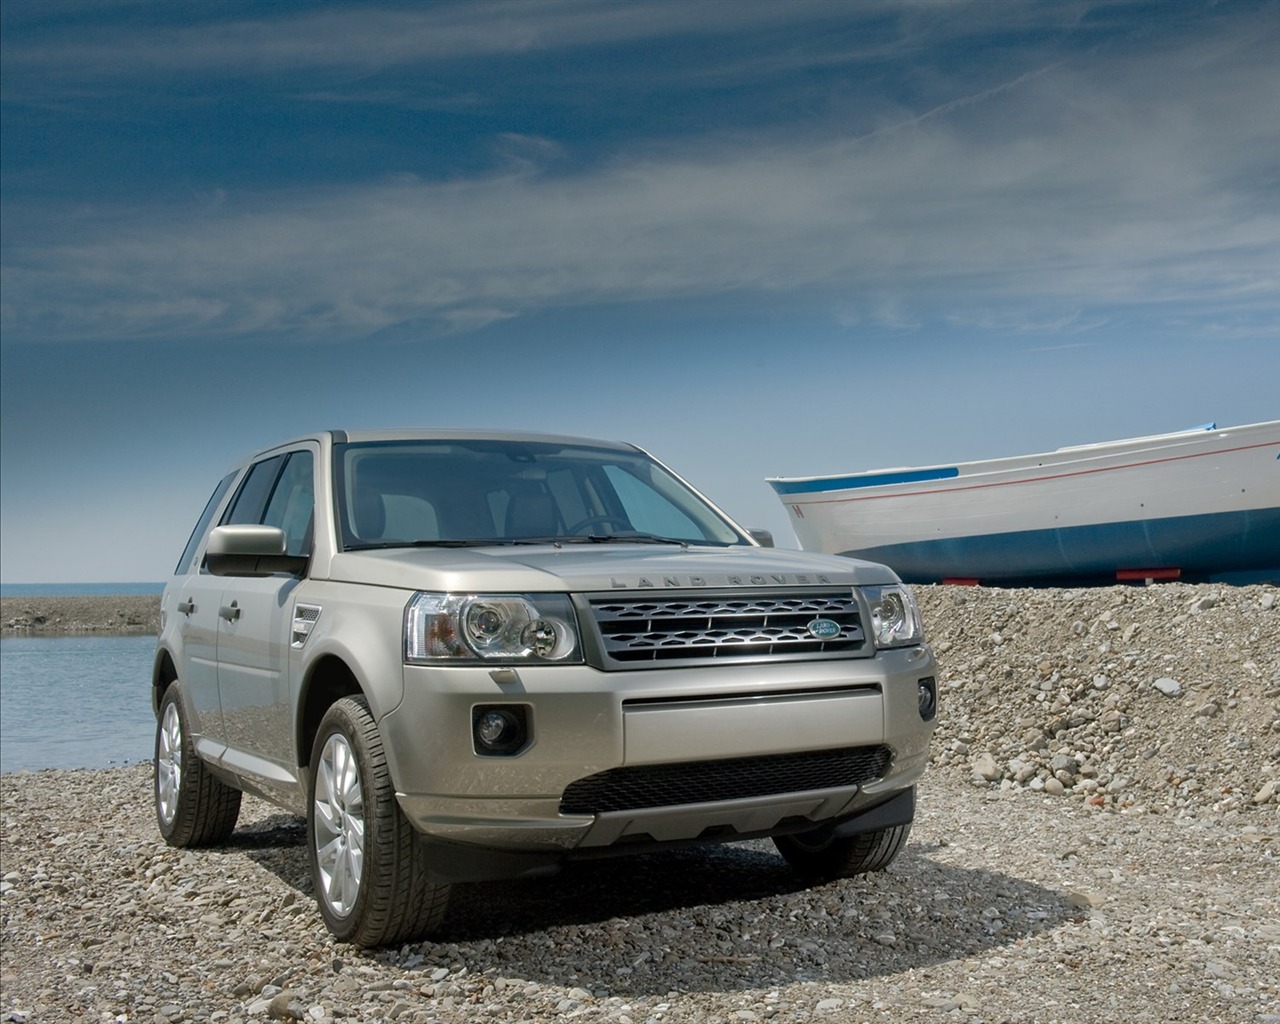 Land Rover wallpapers 2011 (1) #6 - 1280x1024